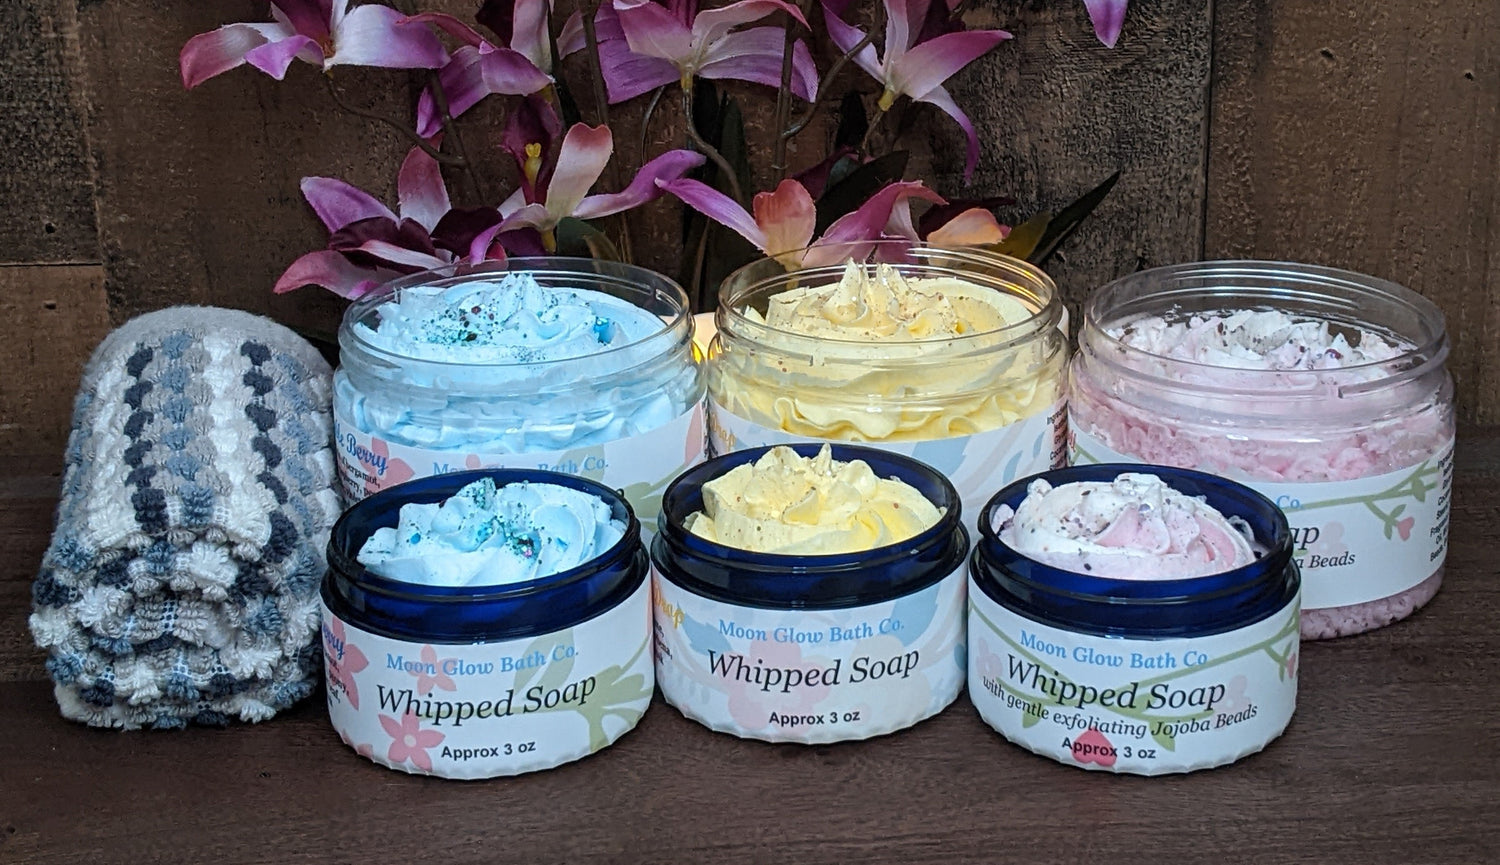 All Whipped Soap